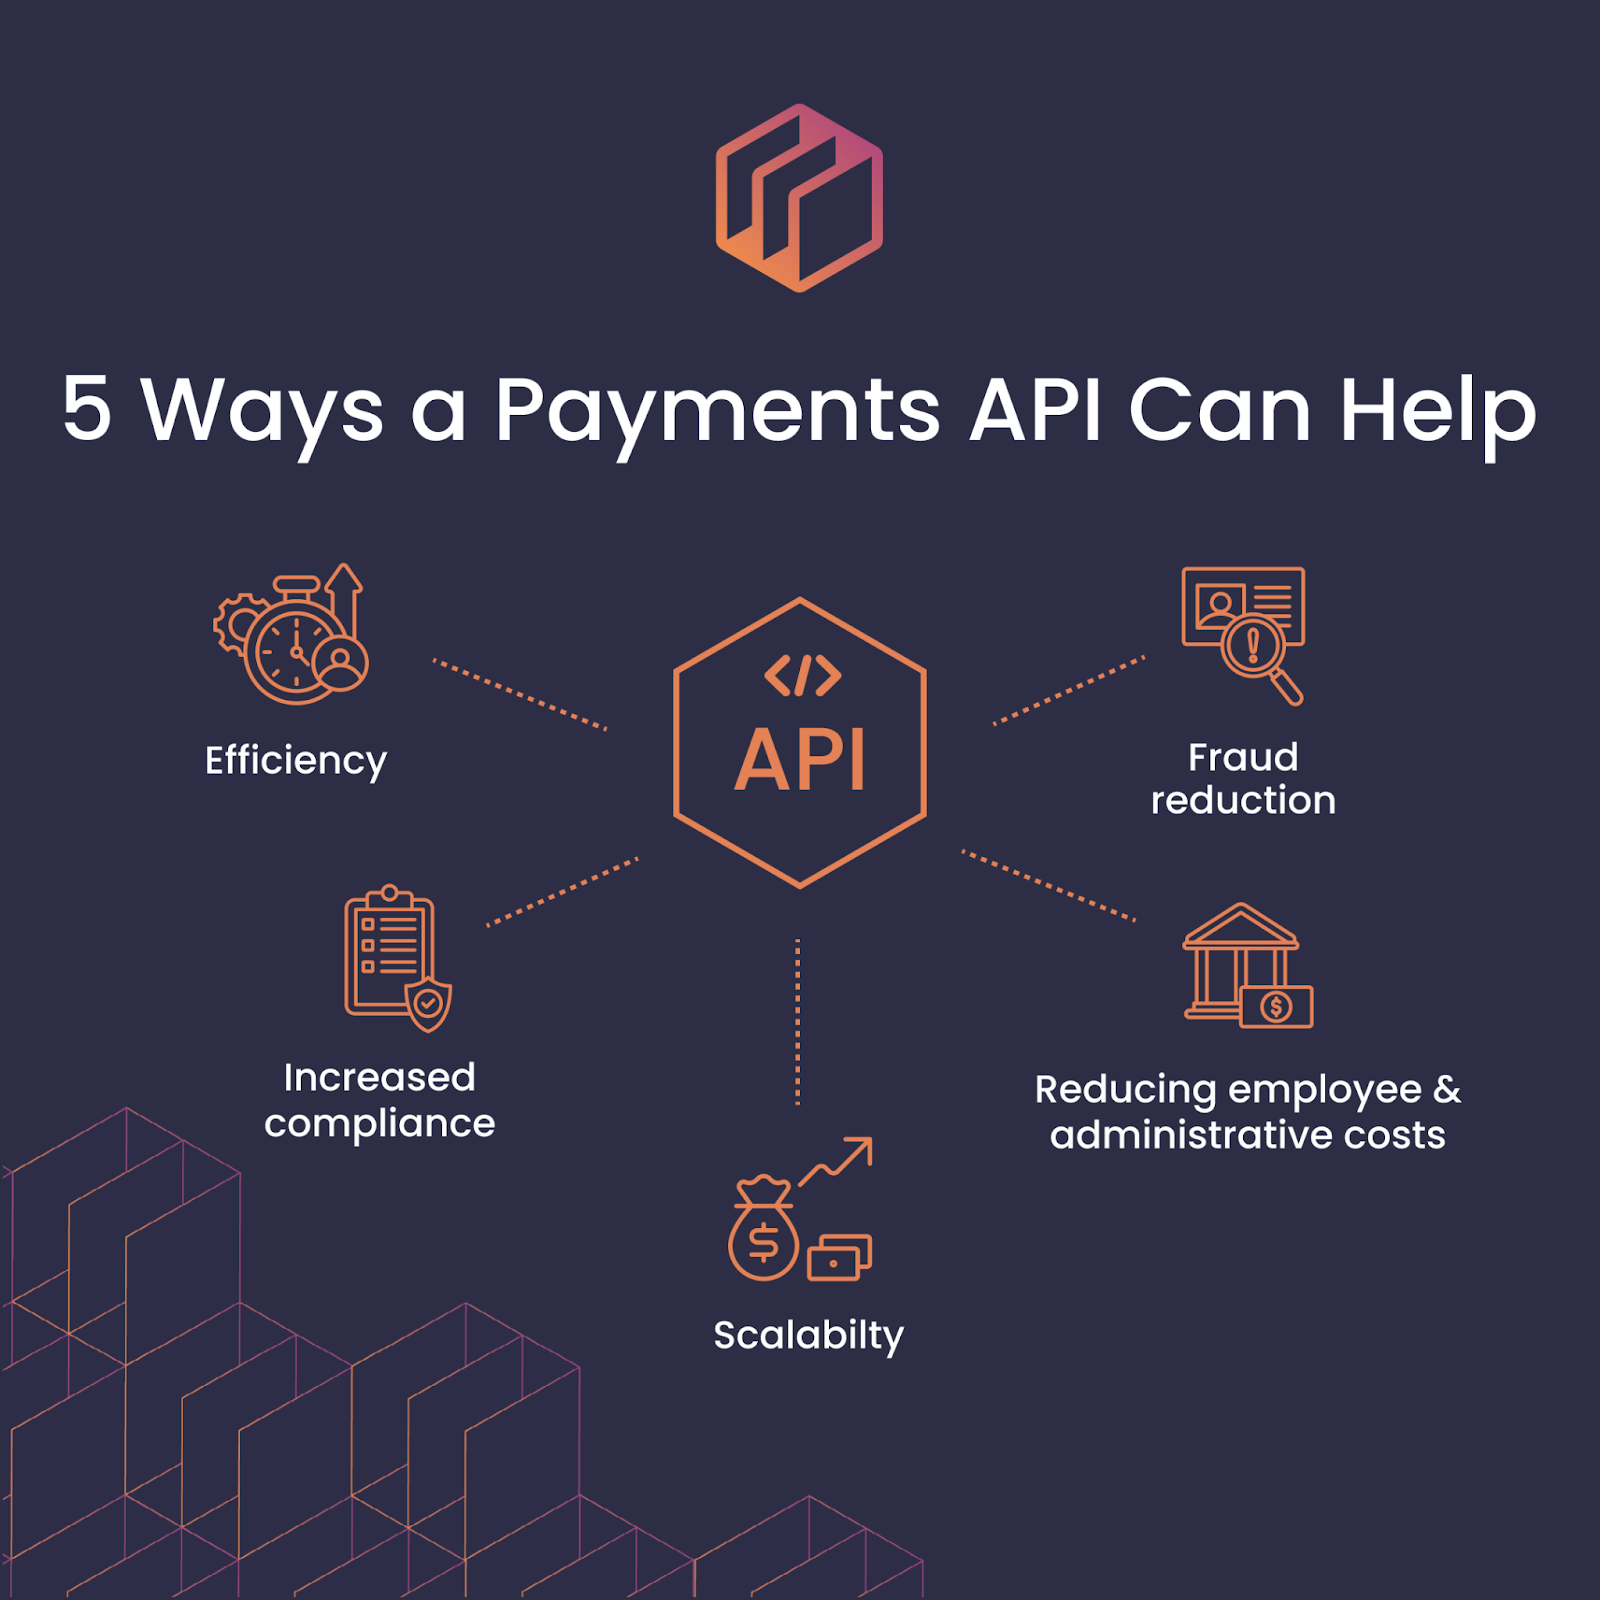 Diagram showing five benefits of using a payments API.